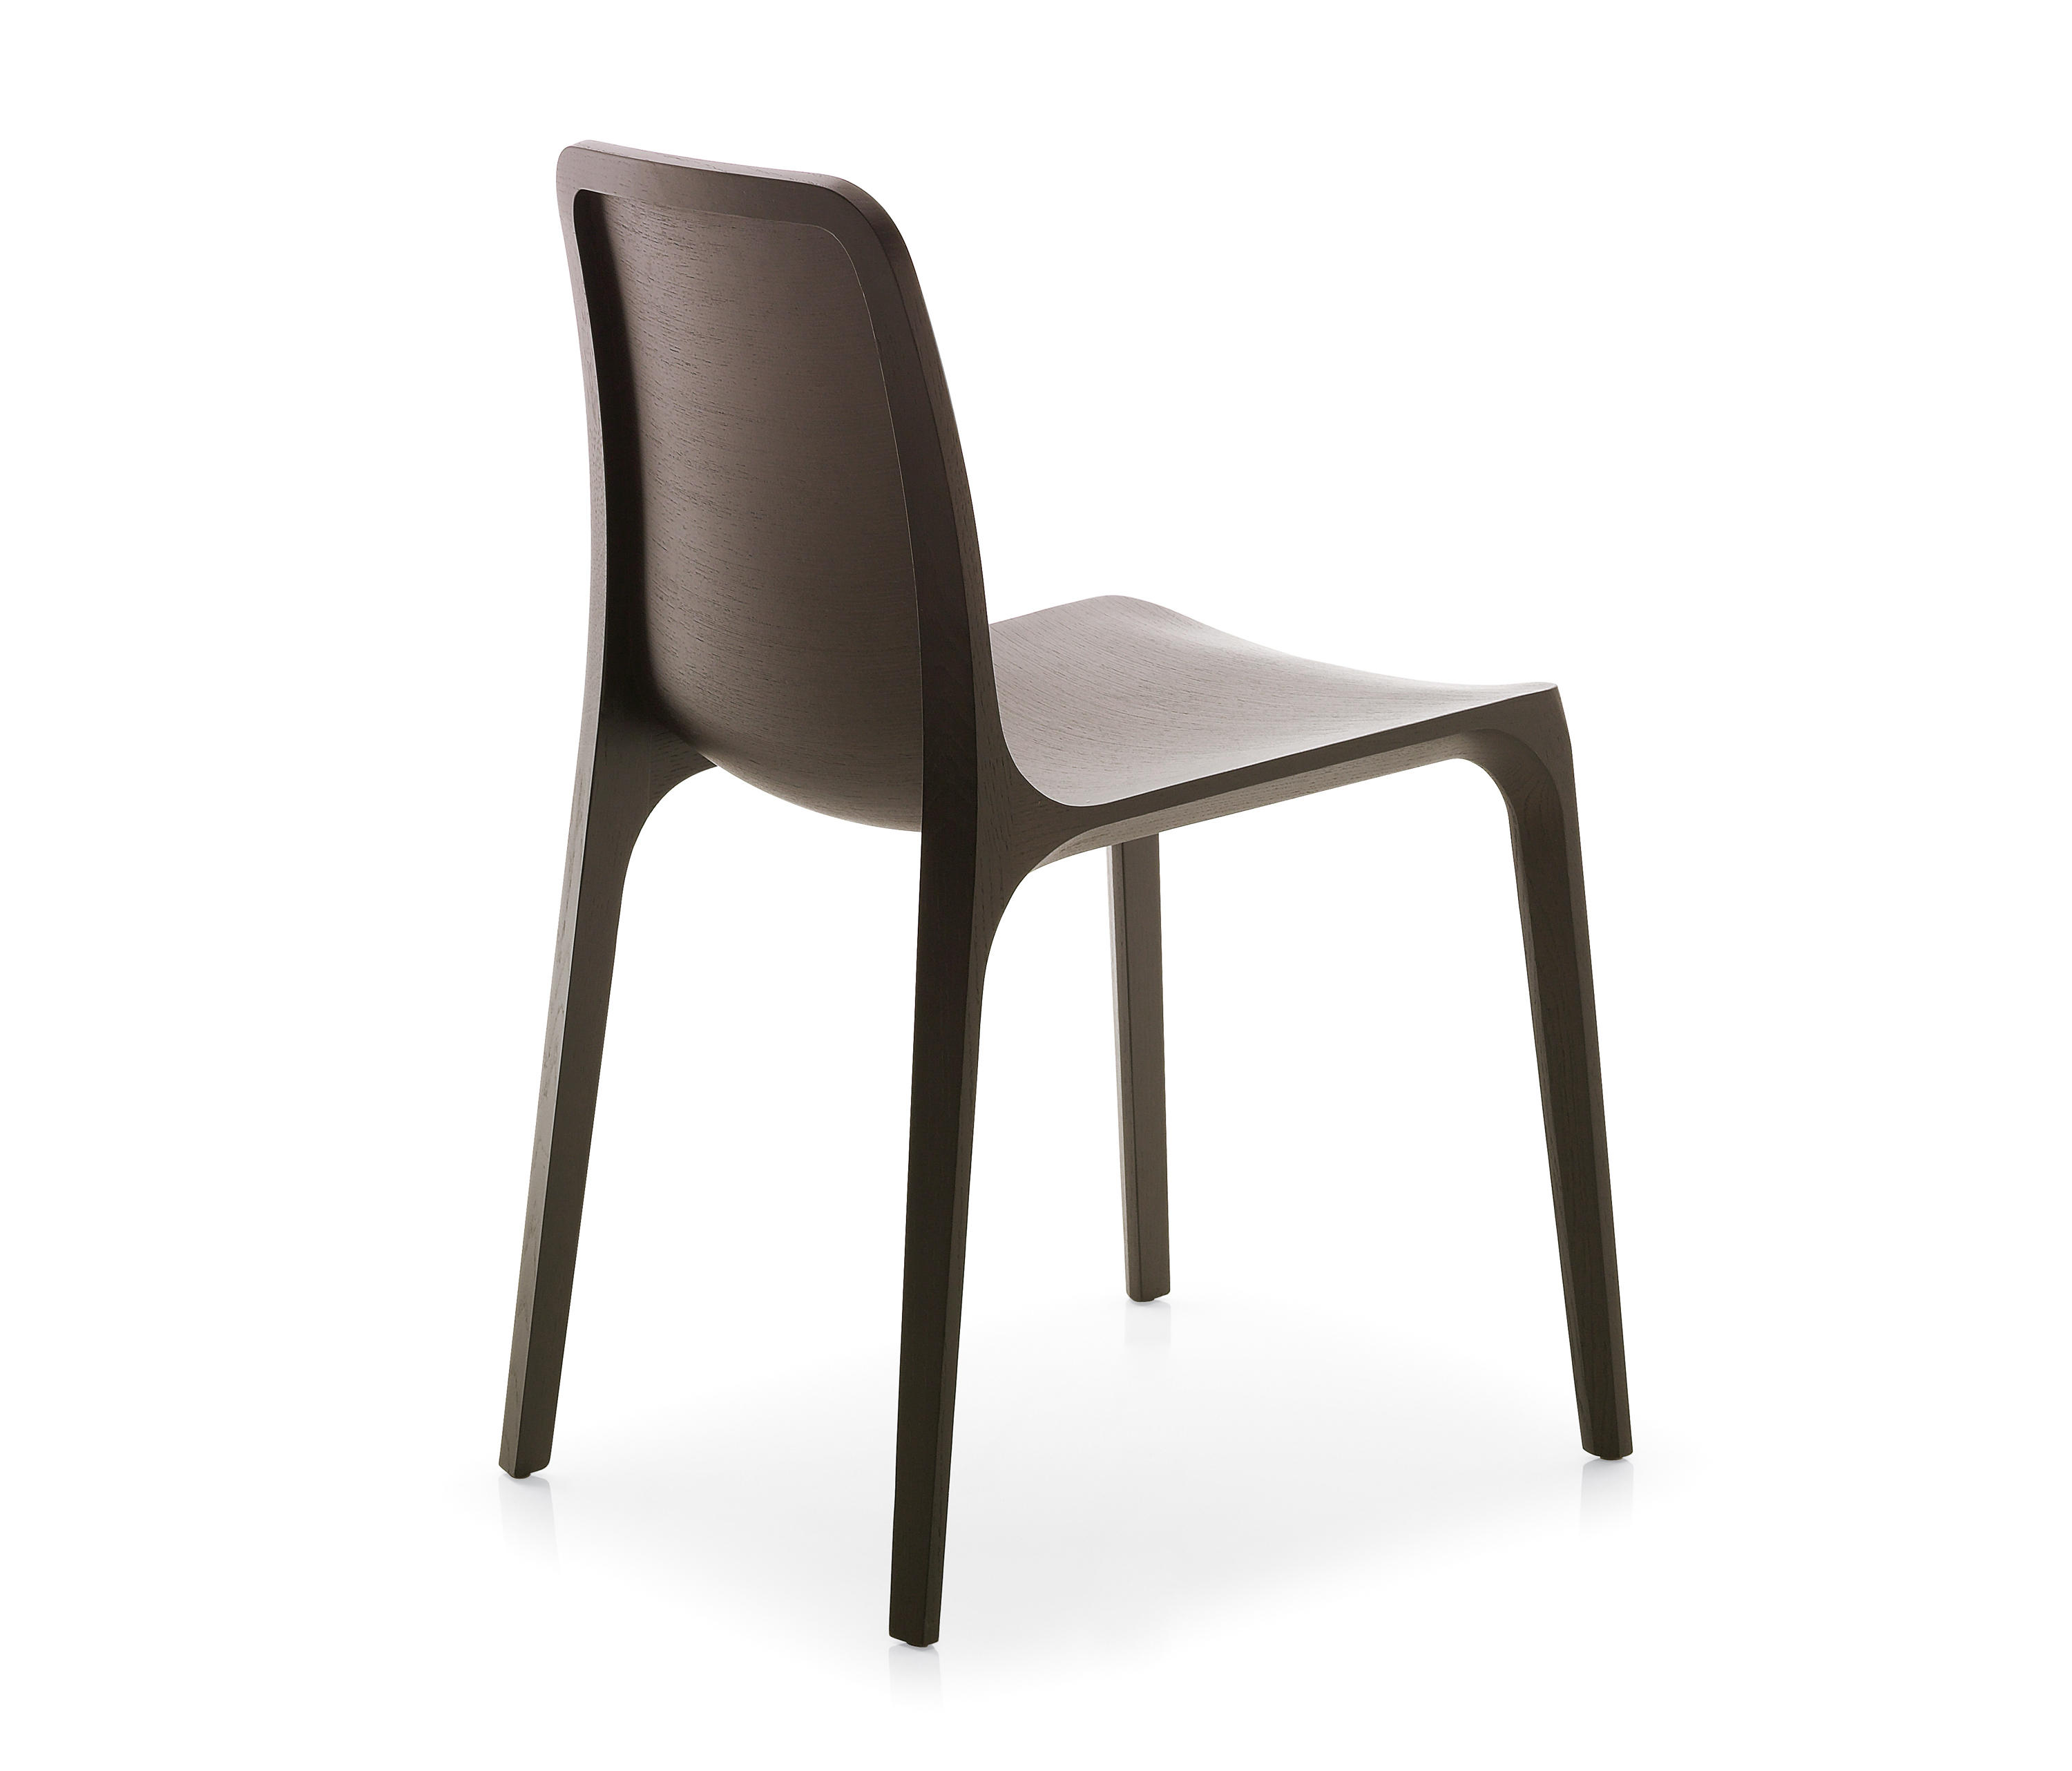 FRIDA 752 - Restaurant chairs from PEDRALI | Architonic